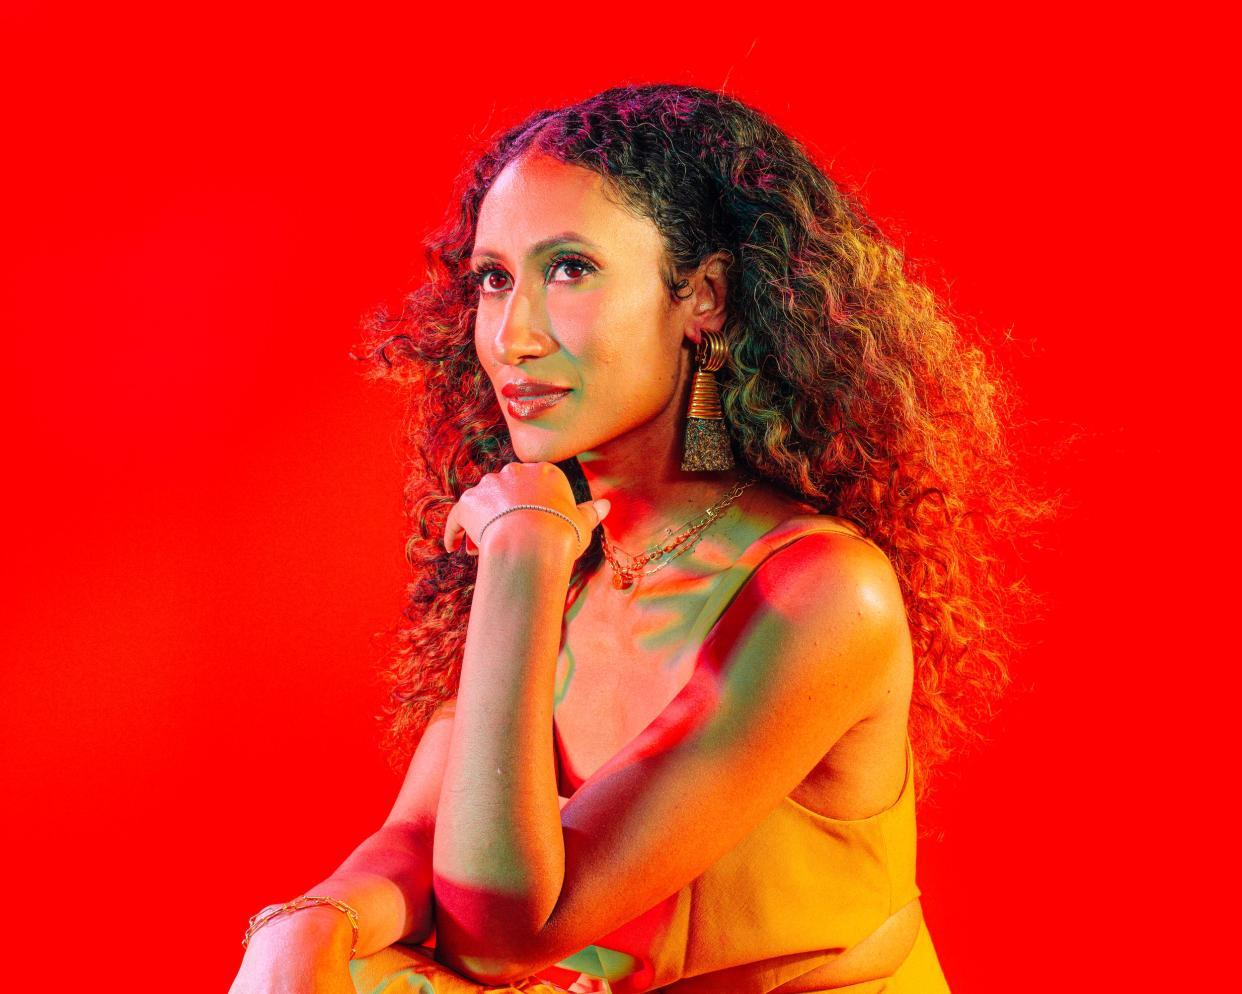 Elaine Welteroth portrait against a bright red background